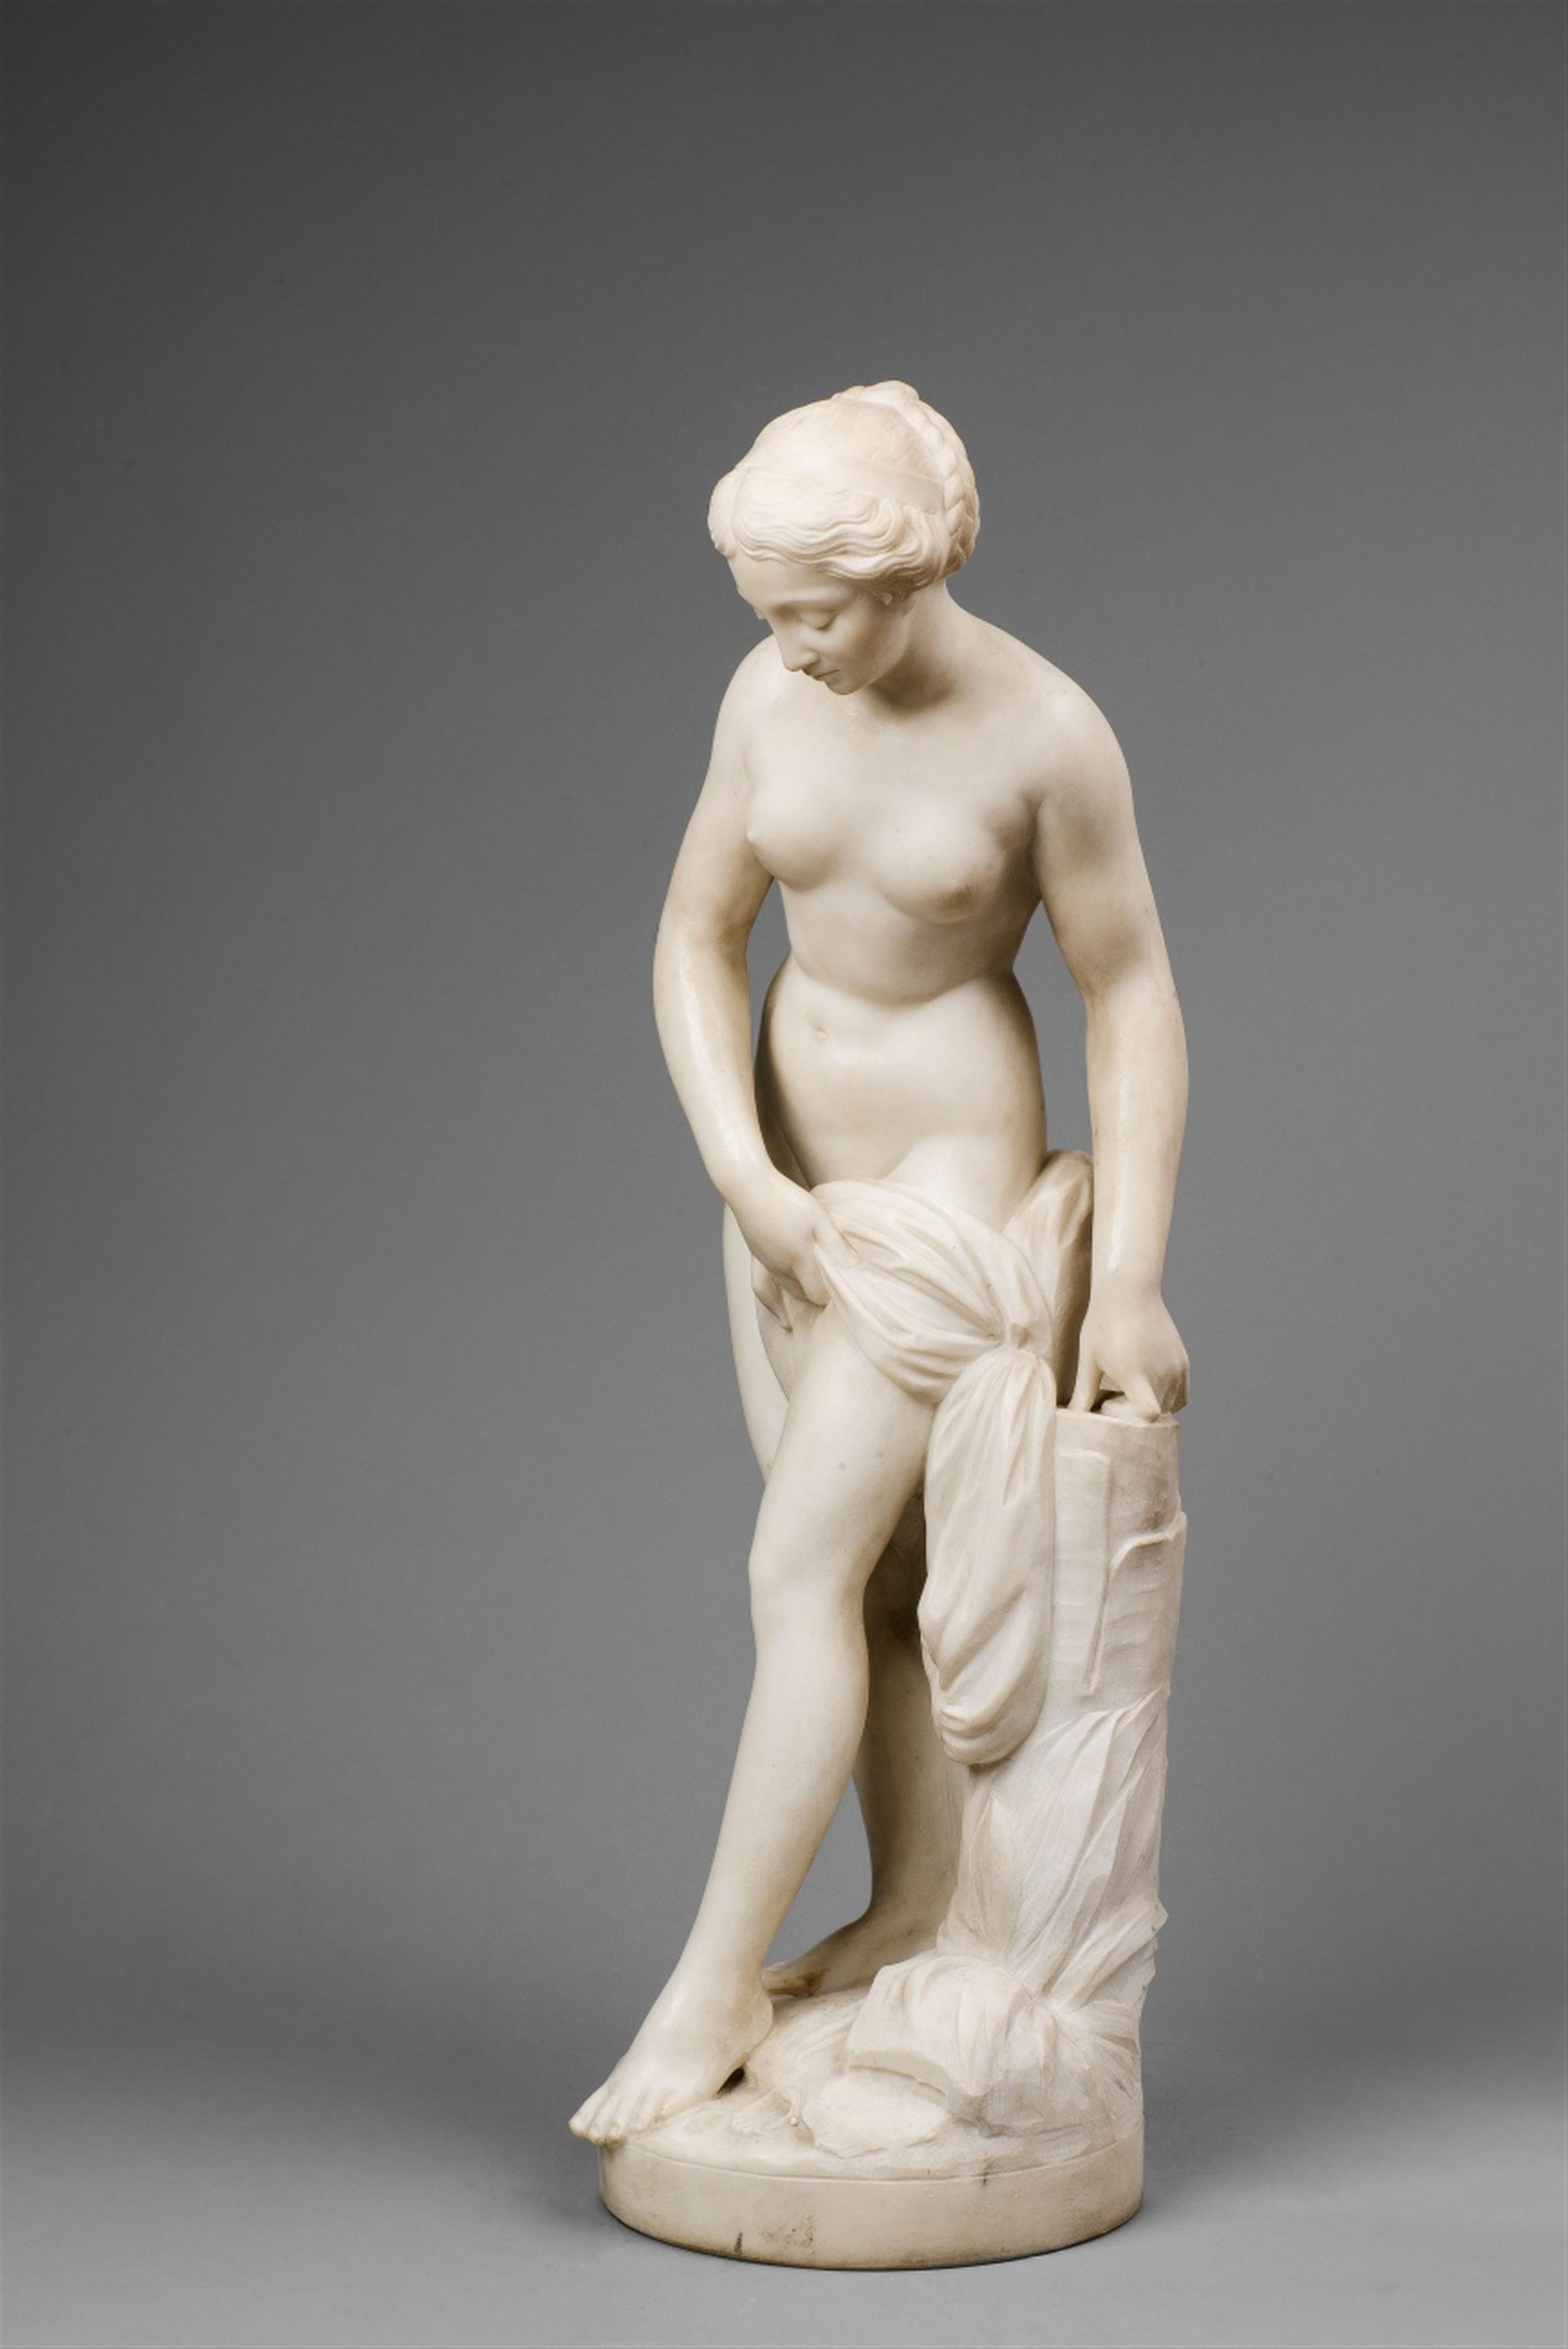 Baigneuse nach Etienne-Maurice Falconet - image-2